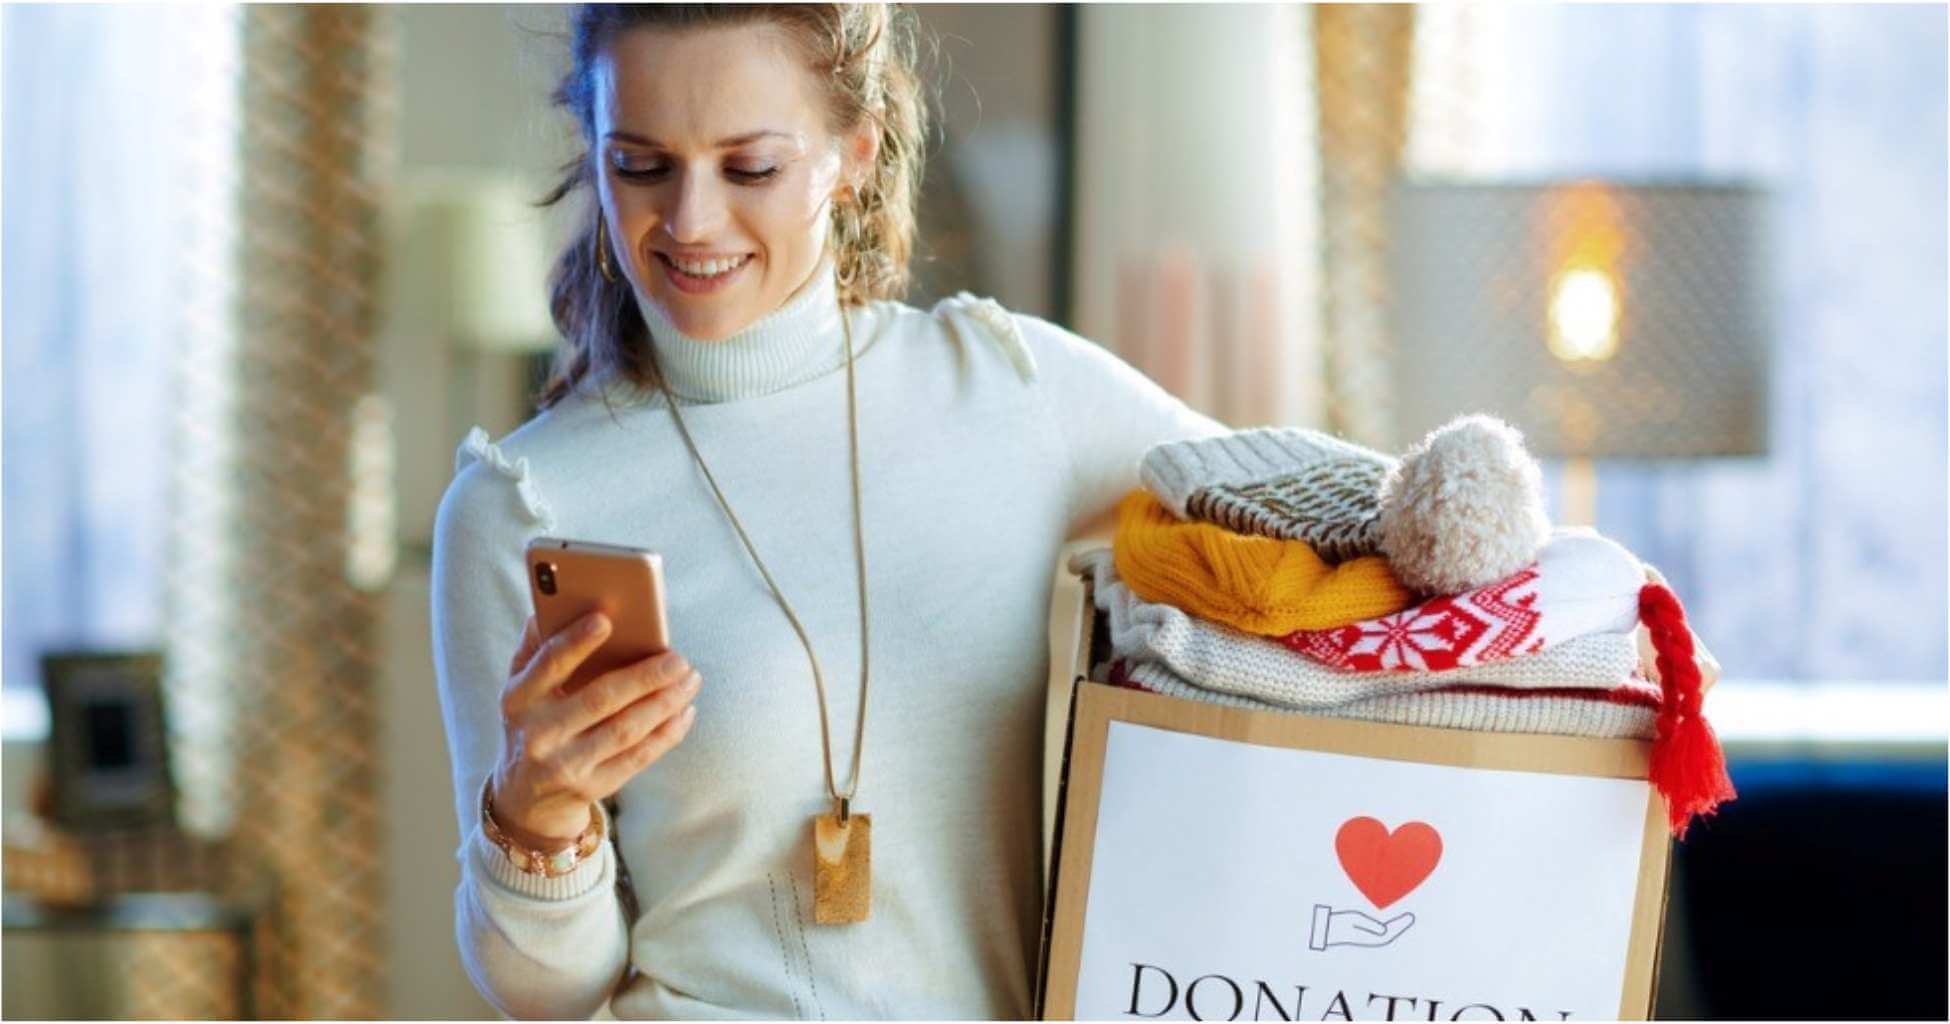 A woman prepares a box of clothes for donation.